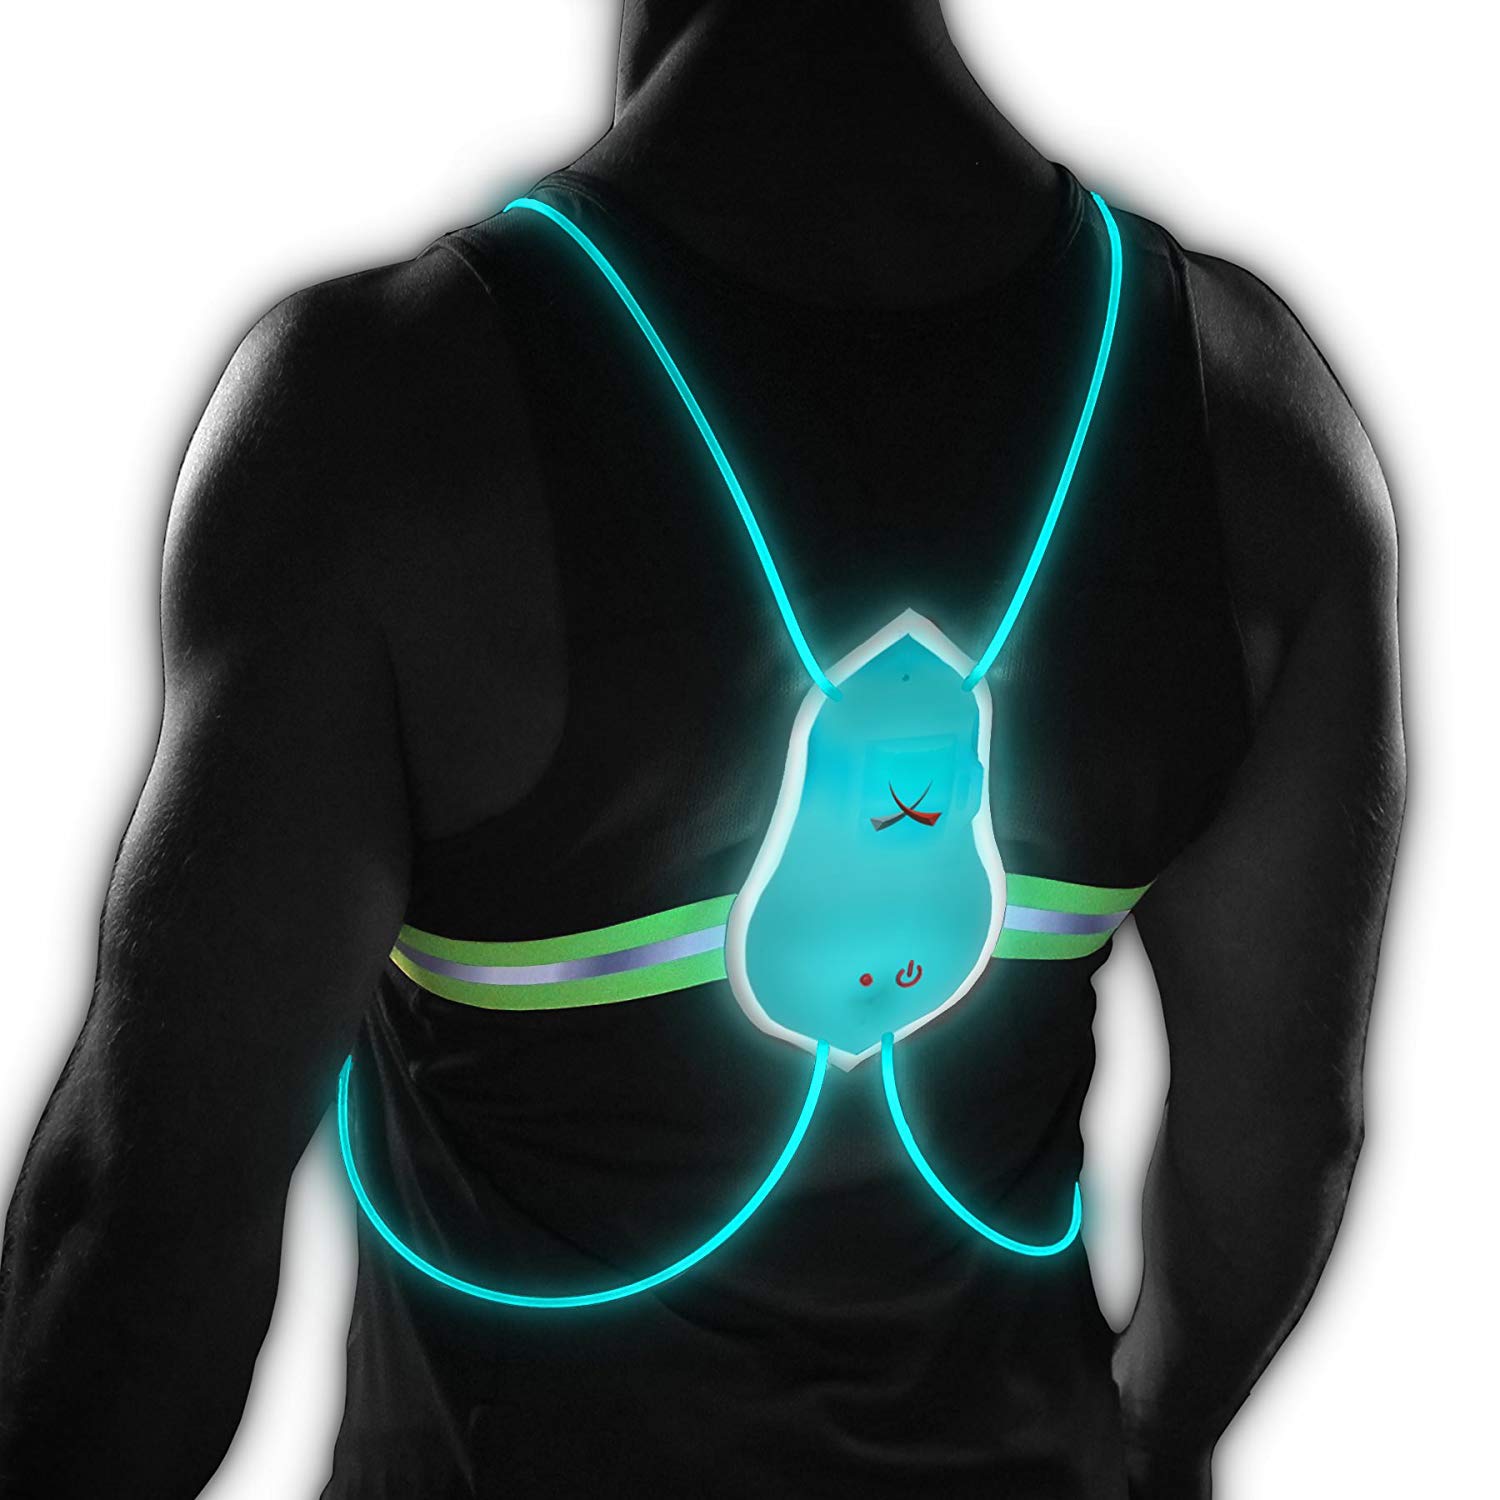 Tracer360 – Revolutionary Illuminated Reflective Vest for Running or Cycling 2